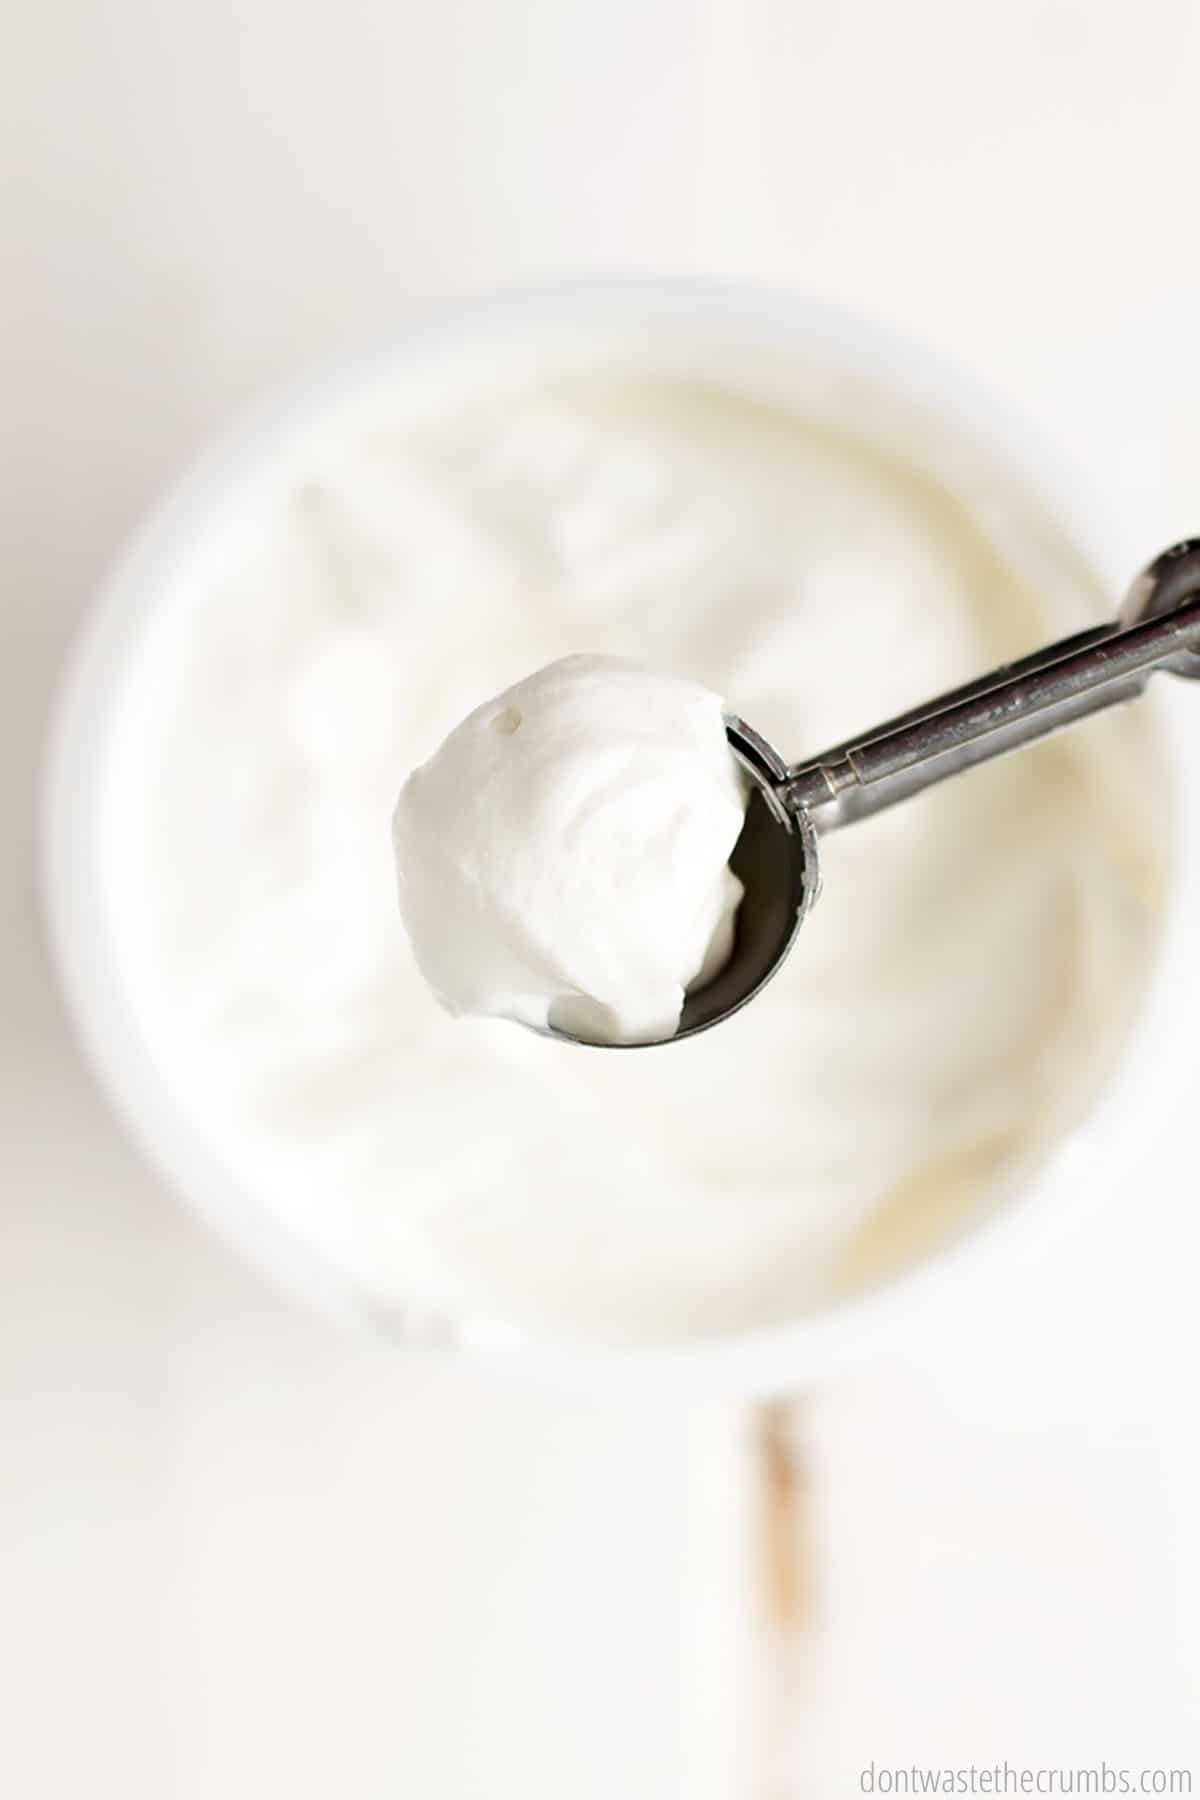 A scoop of yogurt is scooped out of a bowl, ready to be placed on a sheet pan for freezing yogurt.